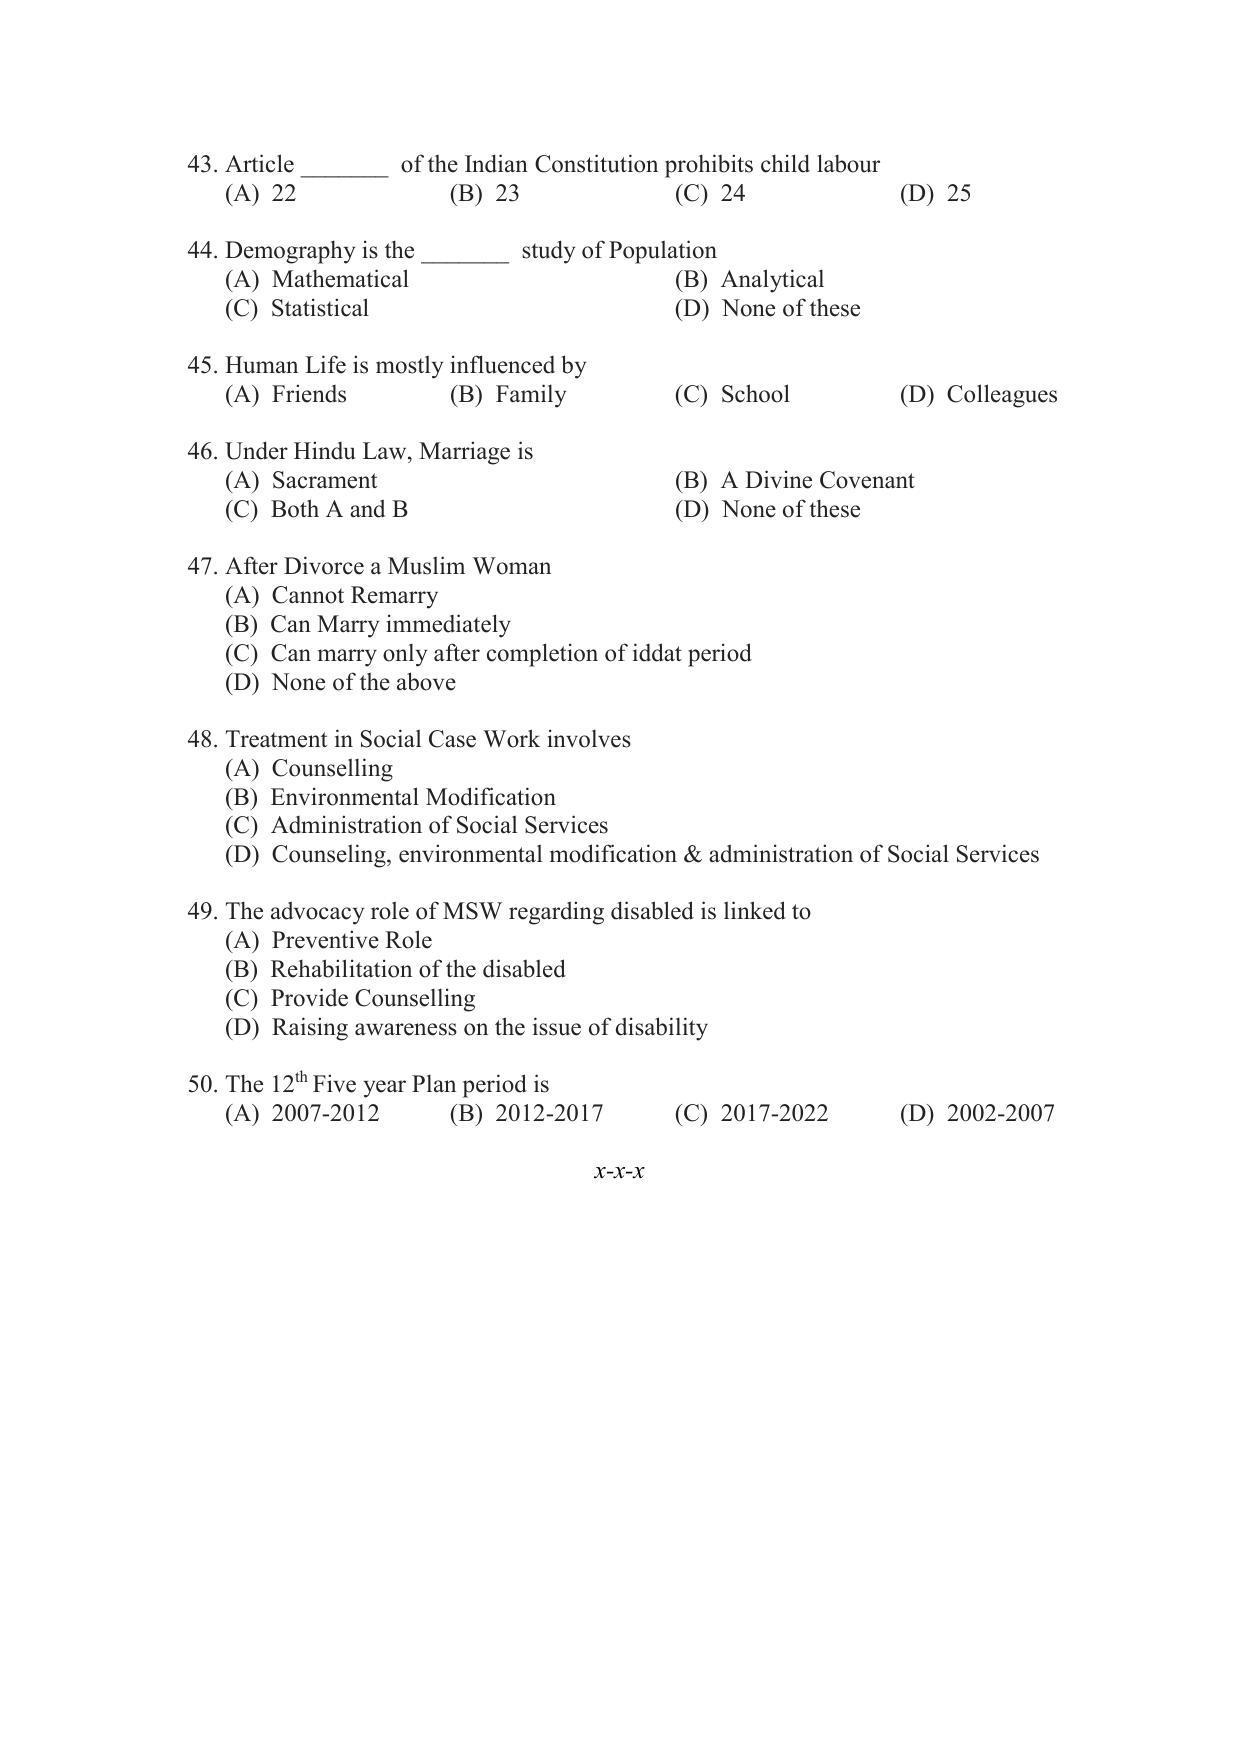 PU MPET Ancient Indian History & Archeology 2022 Question Papers - Page 61